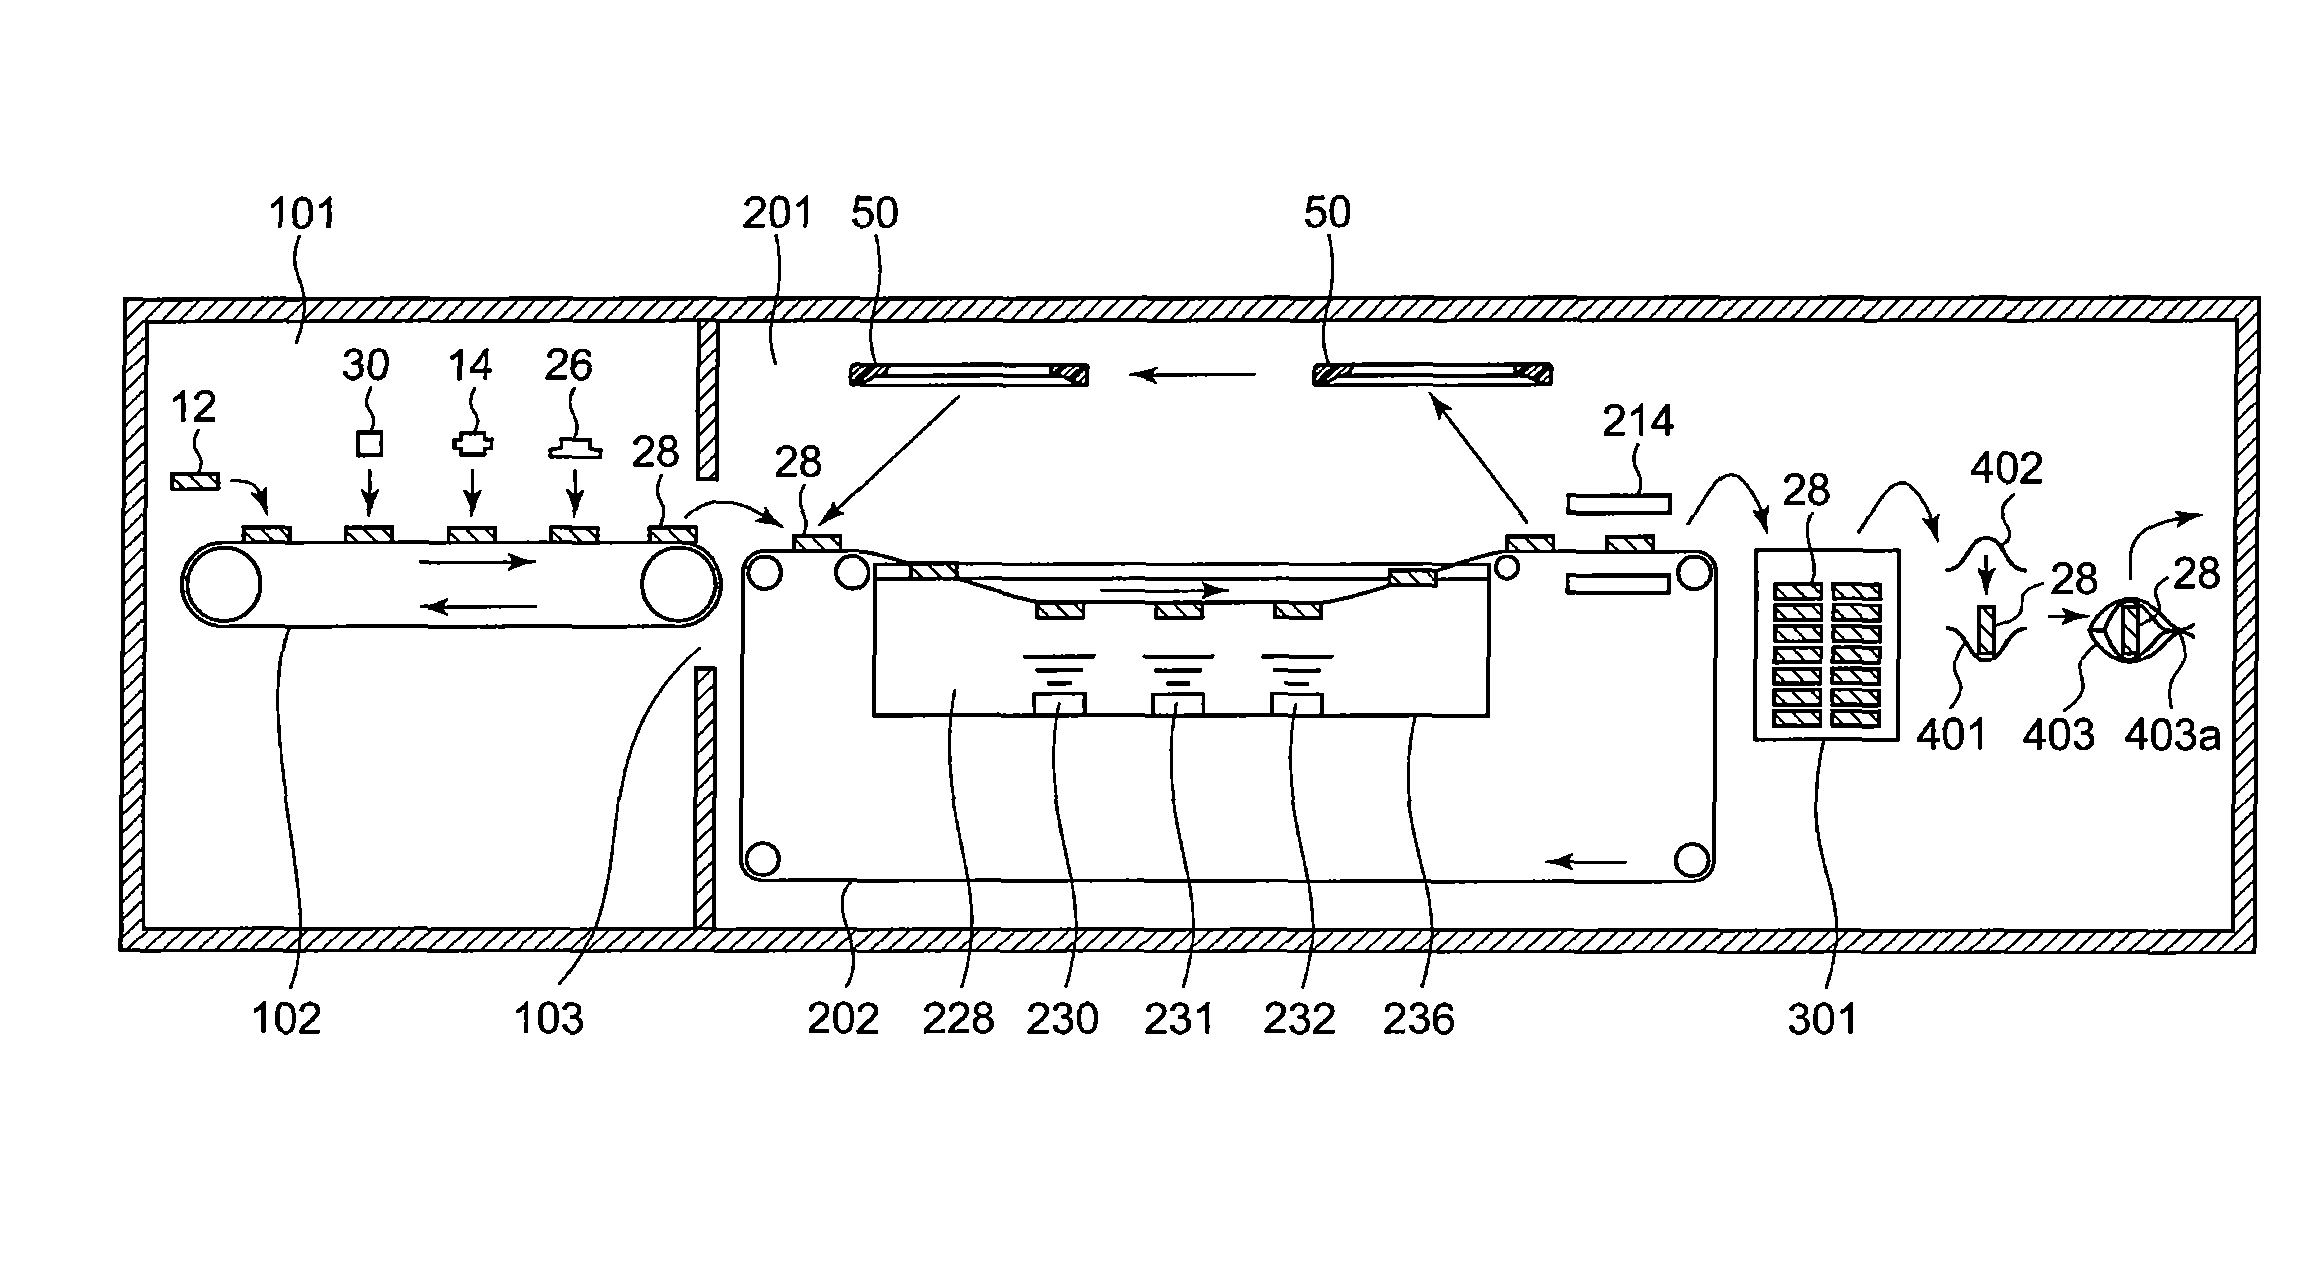 Method of manufacturing a disk drive having a base member, bearing unit, drive unit and hub